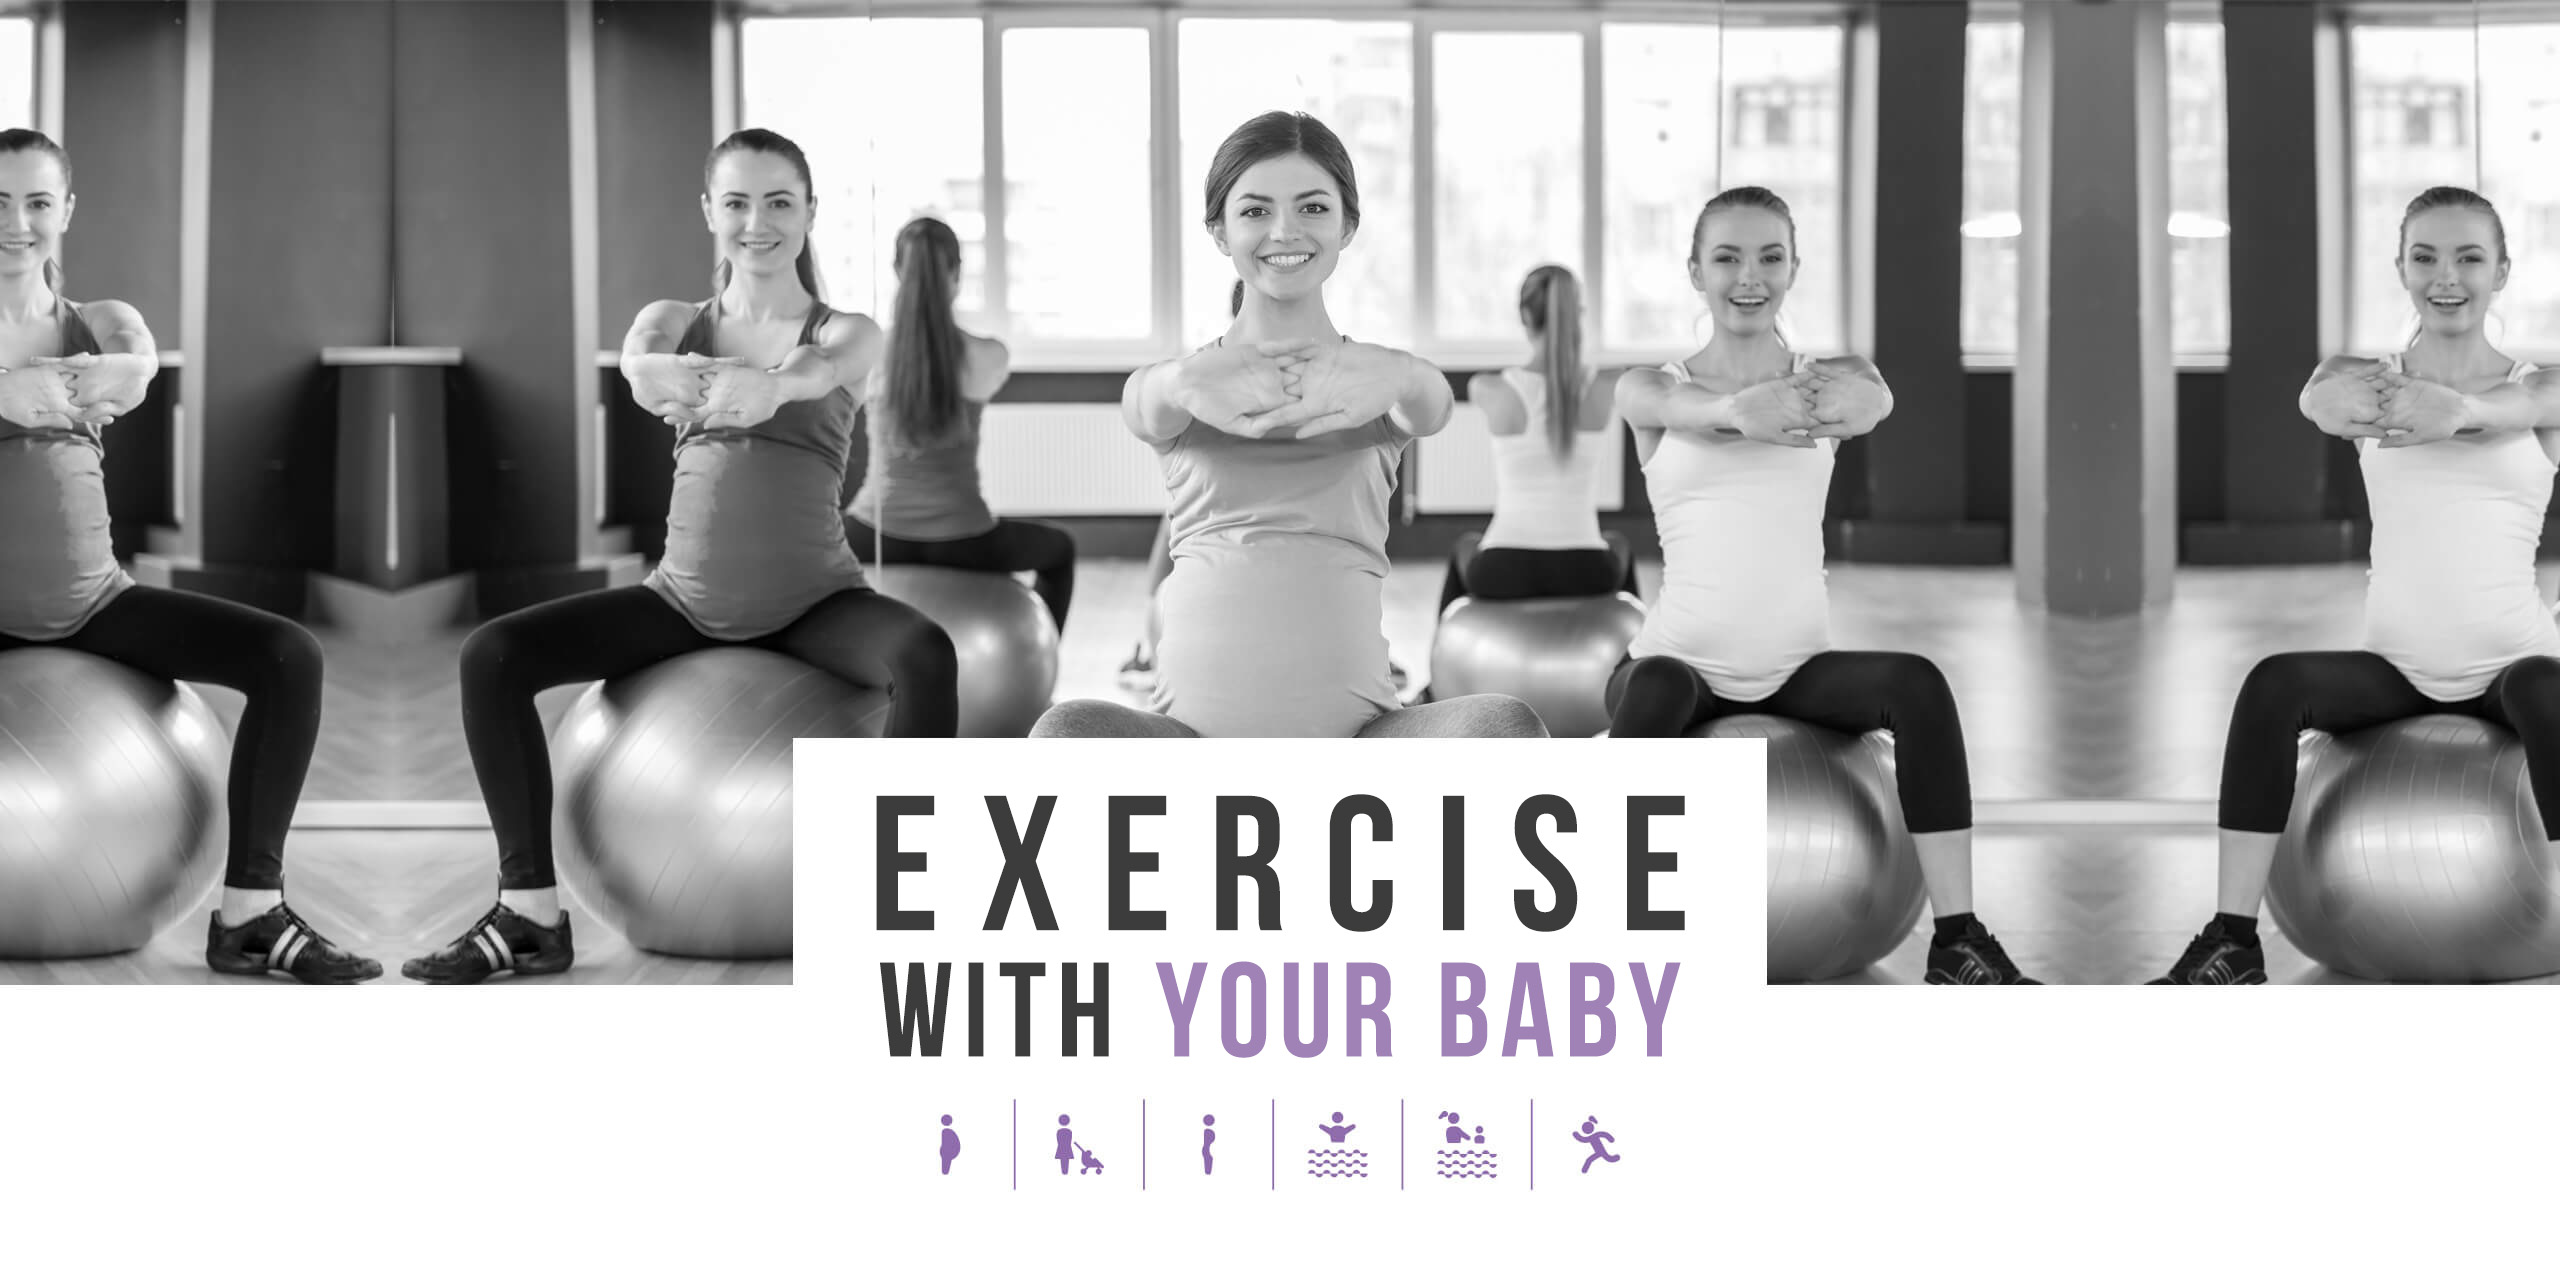 Exercise with your baby